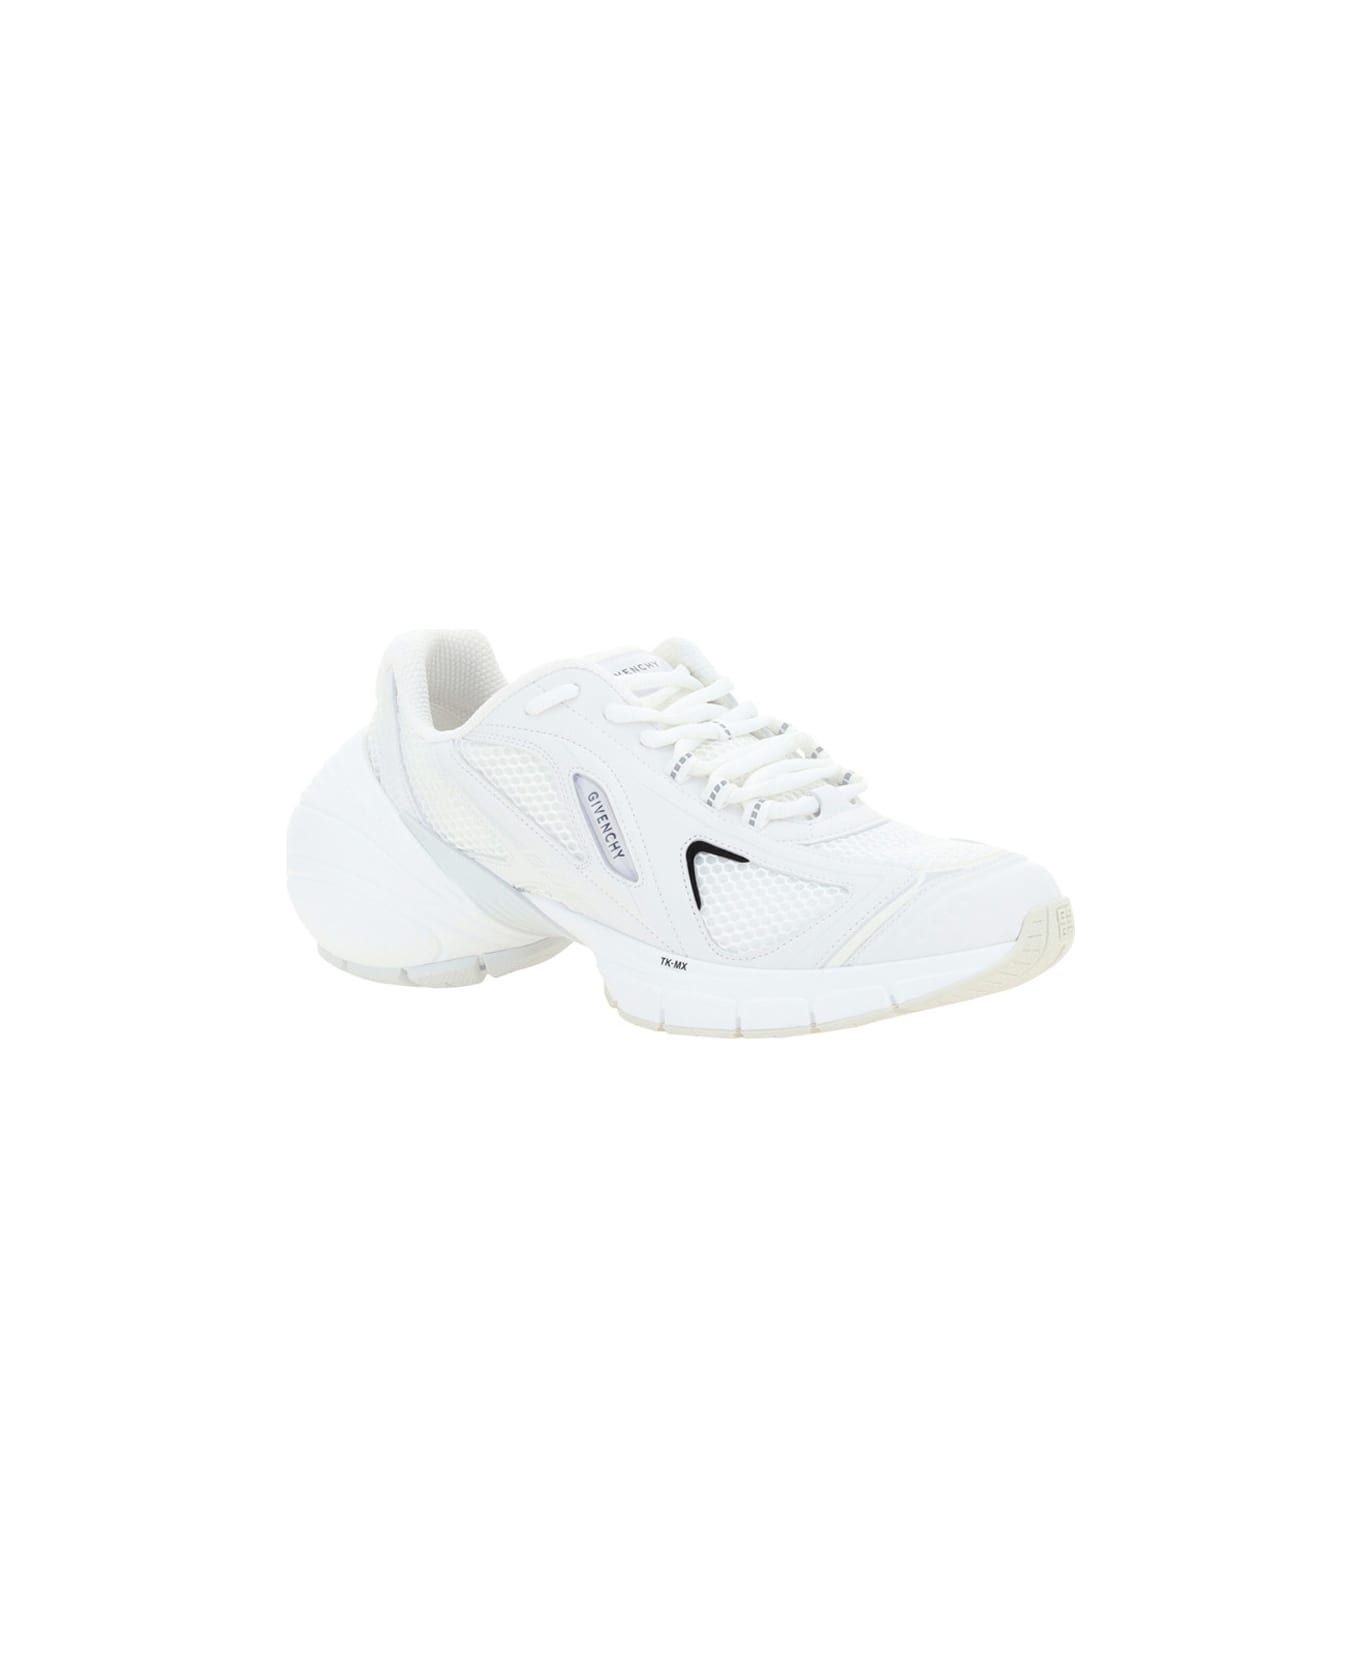 Givenchy Tk-mx Runner Sneakers - WHITE